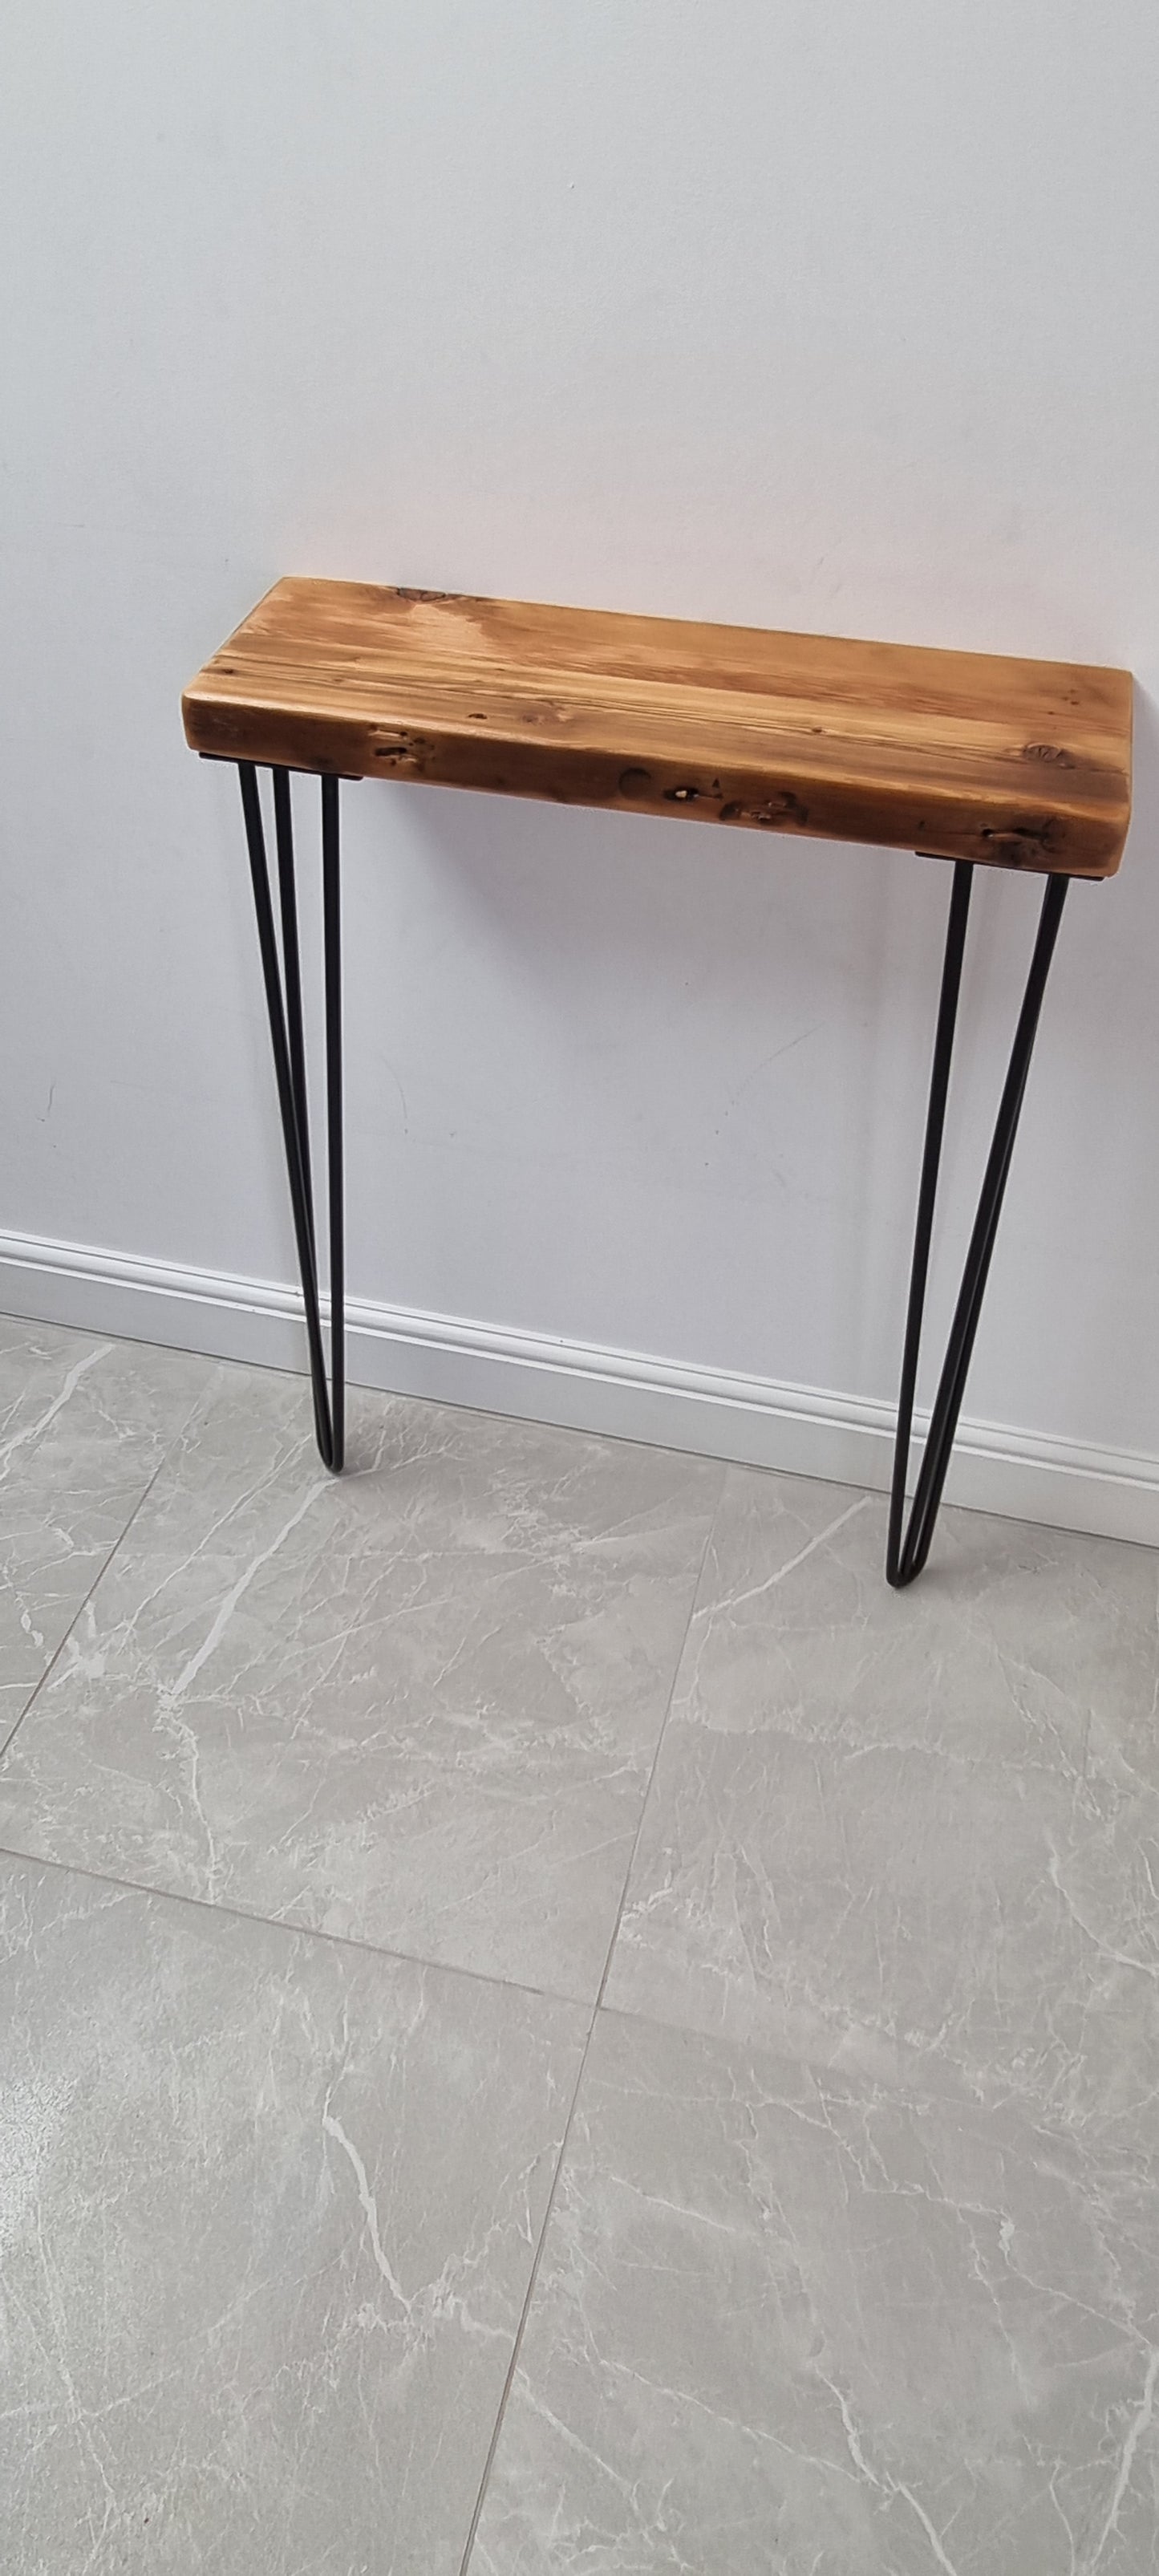 Radiator console table with hairpin legs